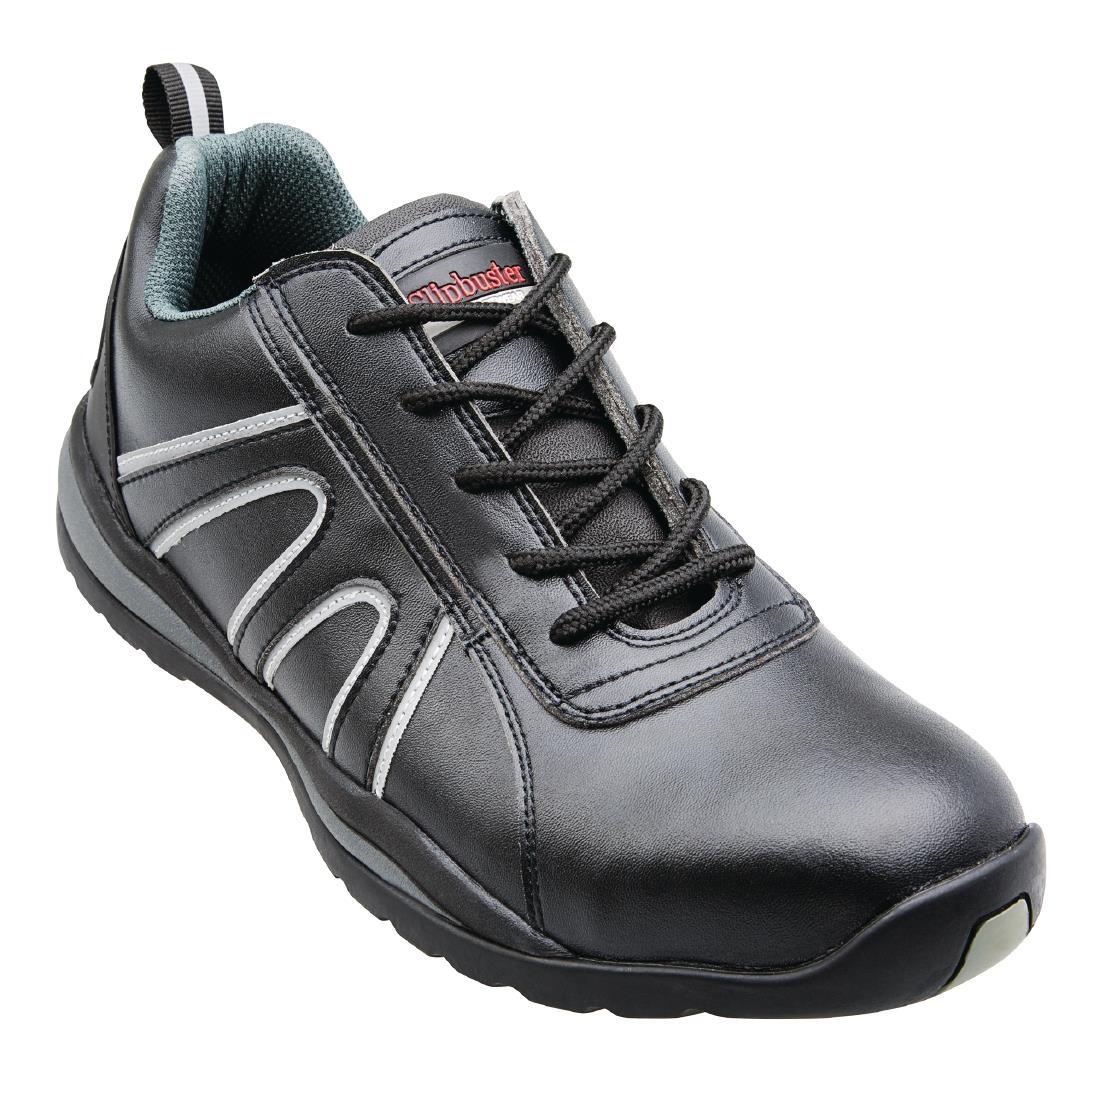 Slipbuster Safety Trainers Black 42 - A708-42  - 6